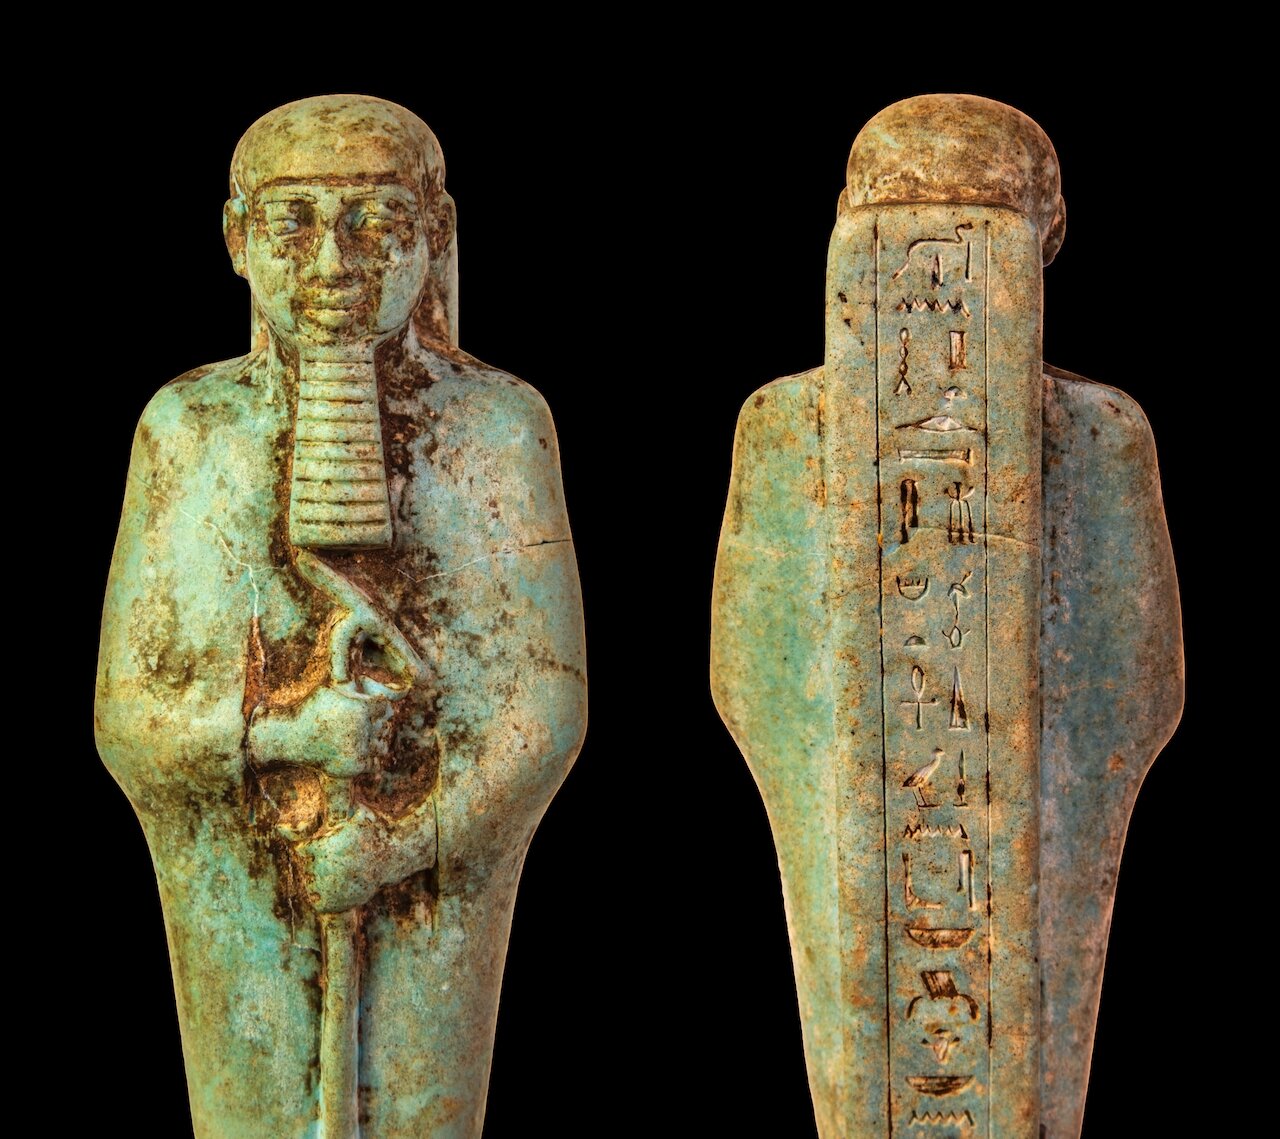 Front view of brown-spotted faience statuette on the left, reverse view on the right.